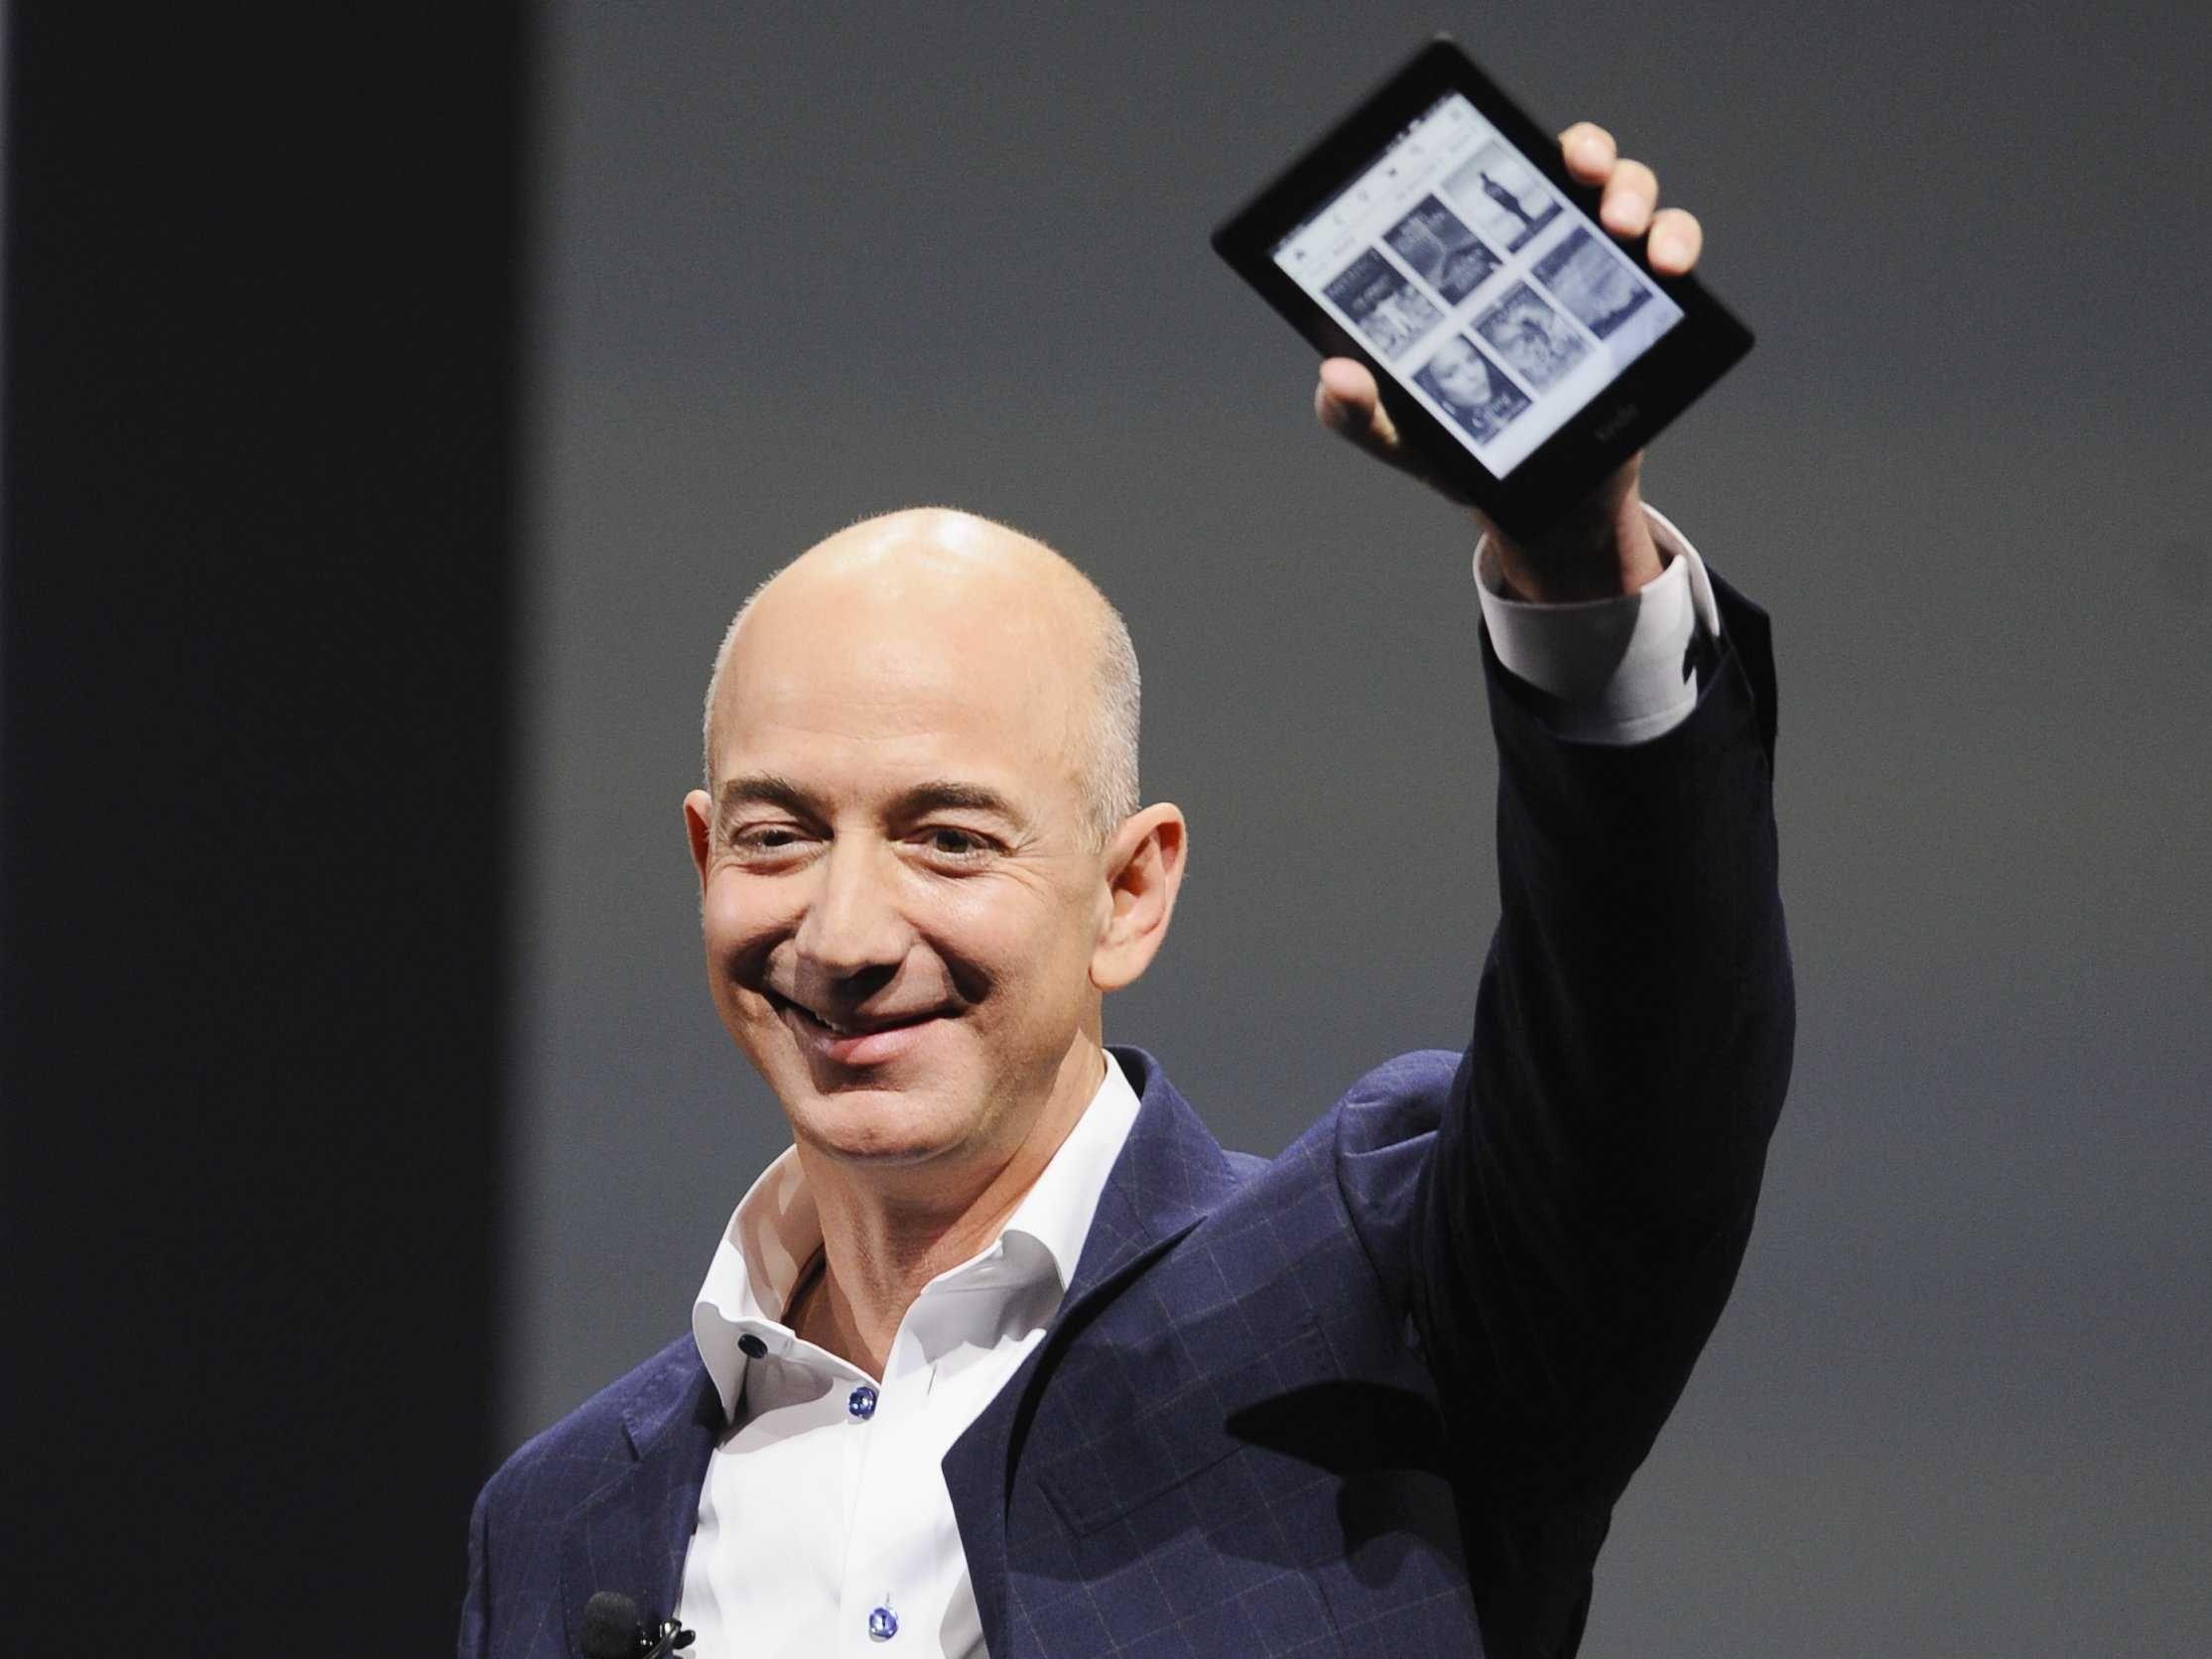 Are you looking for Jeff Bezos wallpapers and fed up with your dull